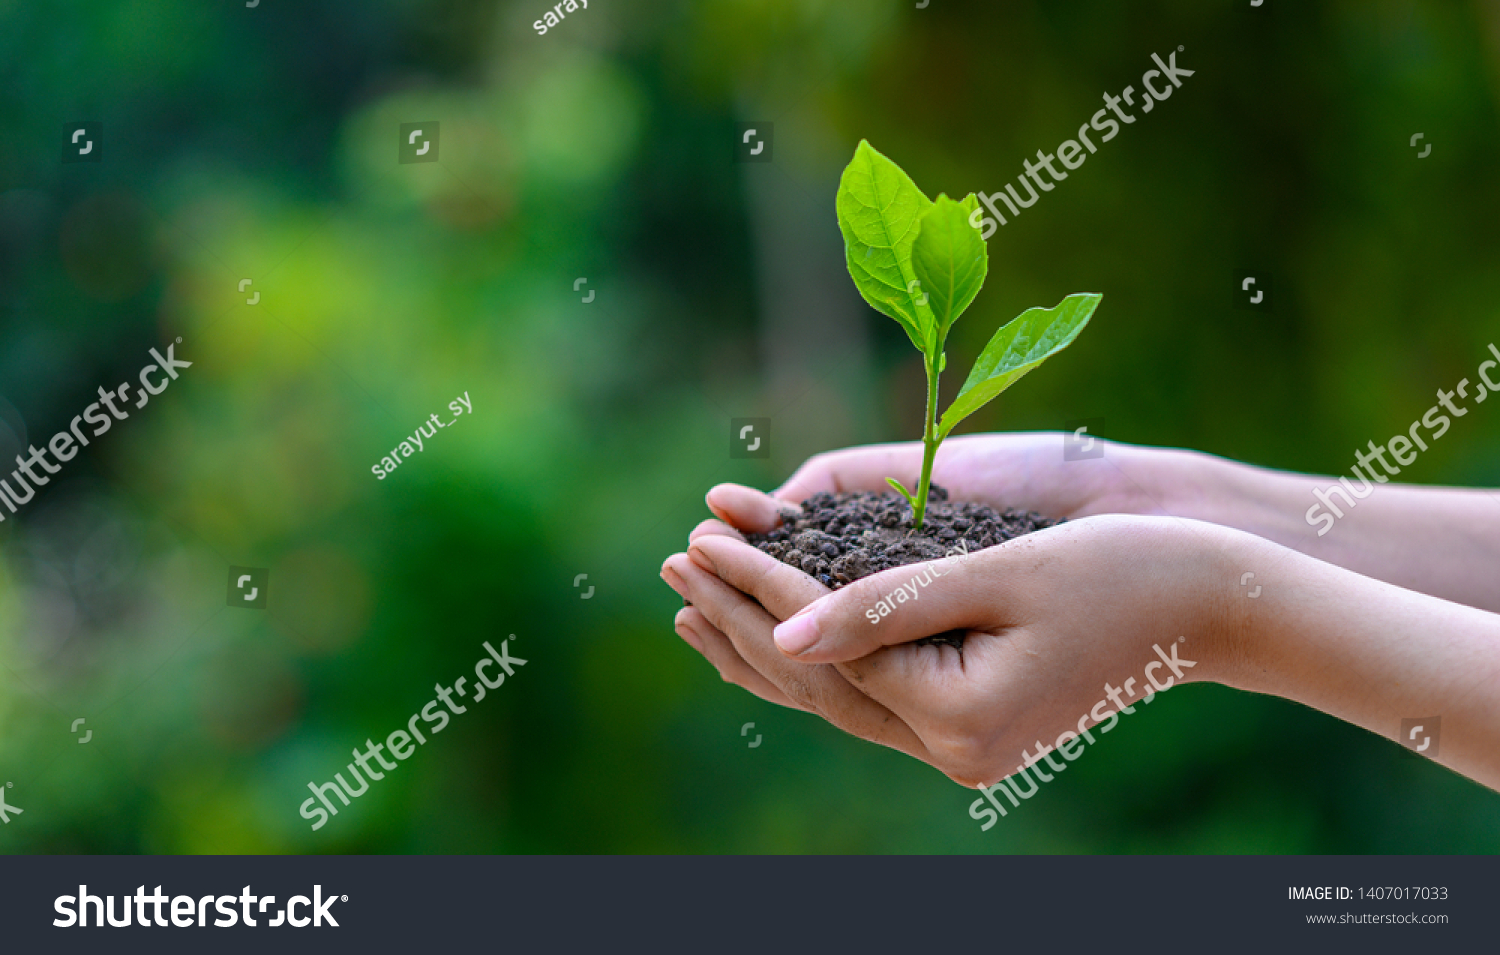 environment Earth Day In the hands of trees growing seedlings. Bokeh green Background Female hand holding tree on nature field grass Forest conservation concept #1407017033